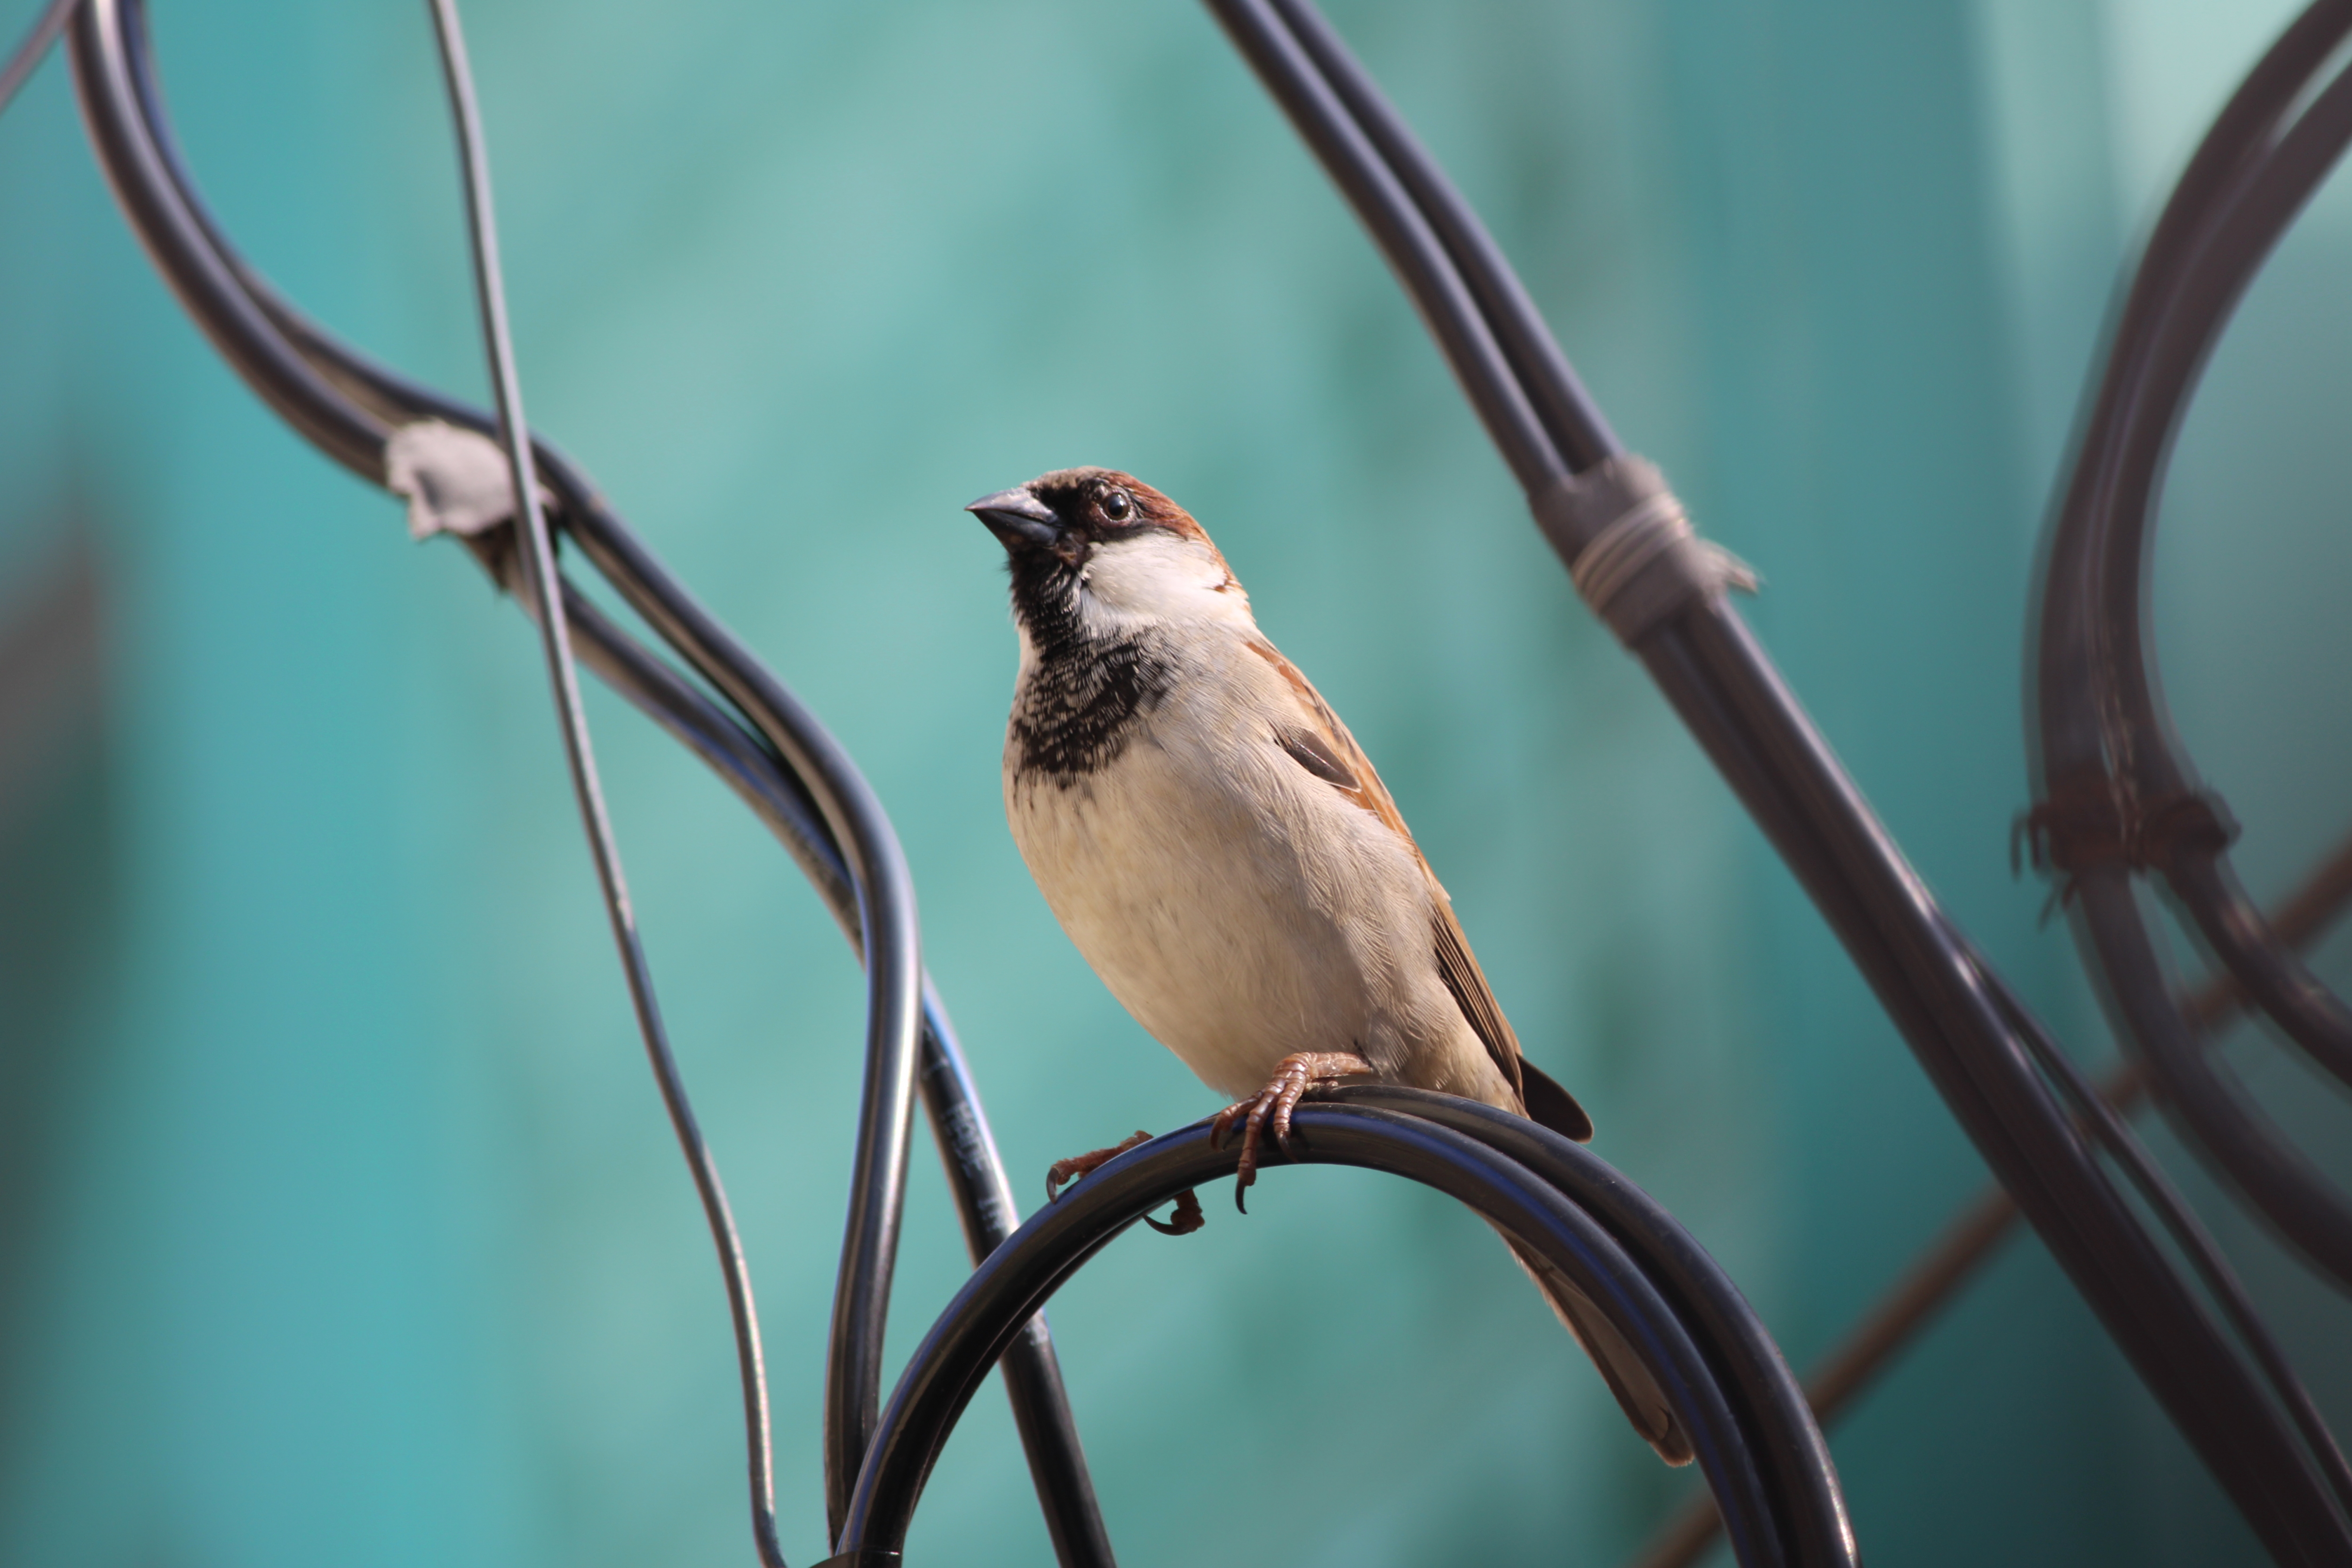 Sparrow - Symbolizes joy and protection